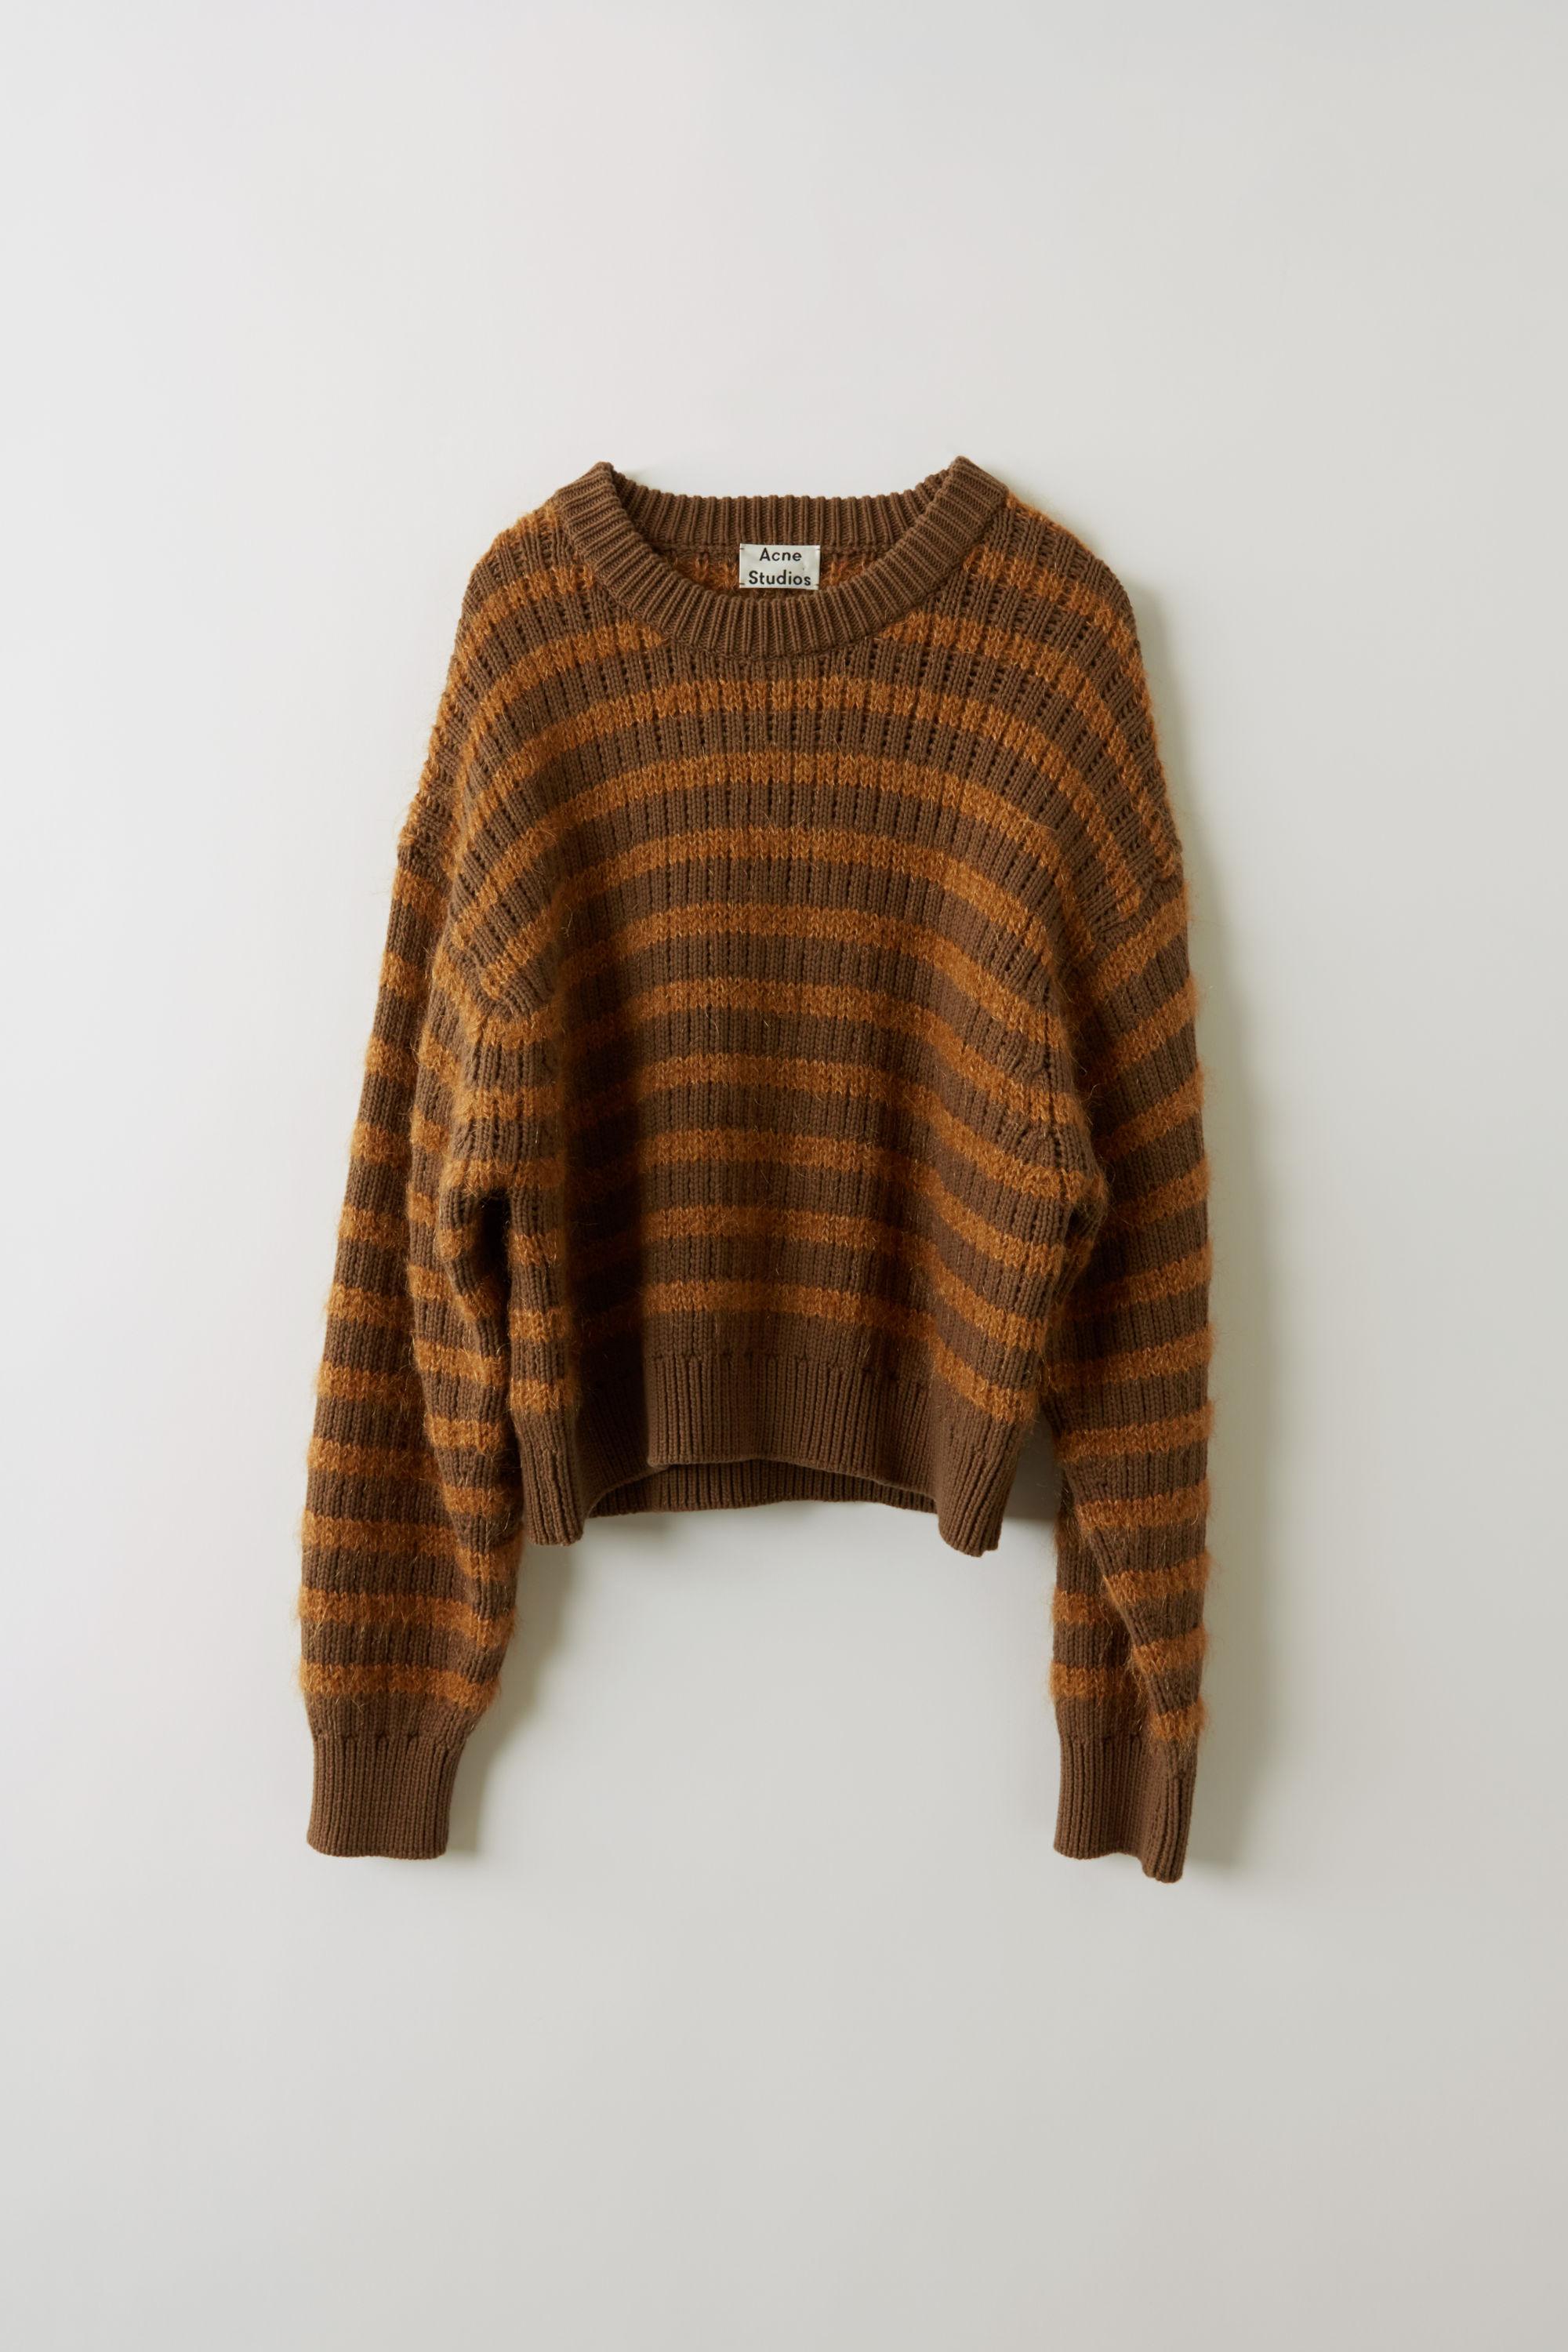 Acne Studios Synthetic Fn-wn-knit000077 Brown/tobacco Striped Sweater ...